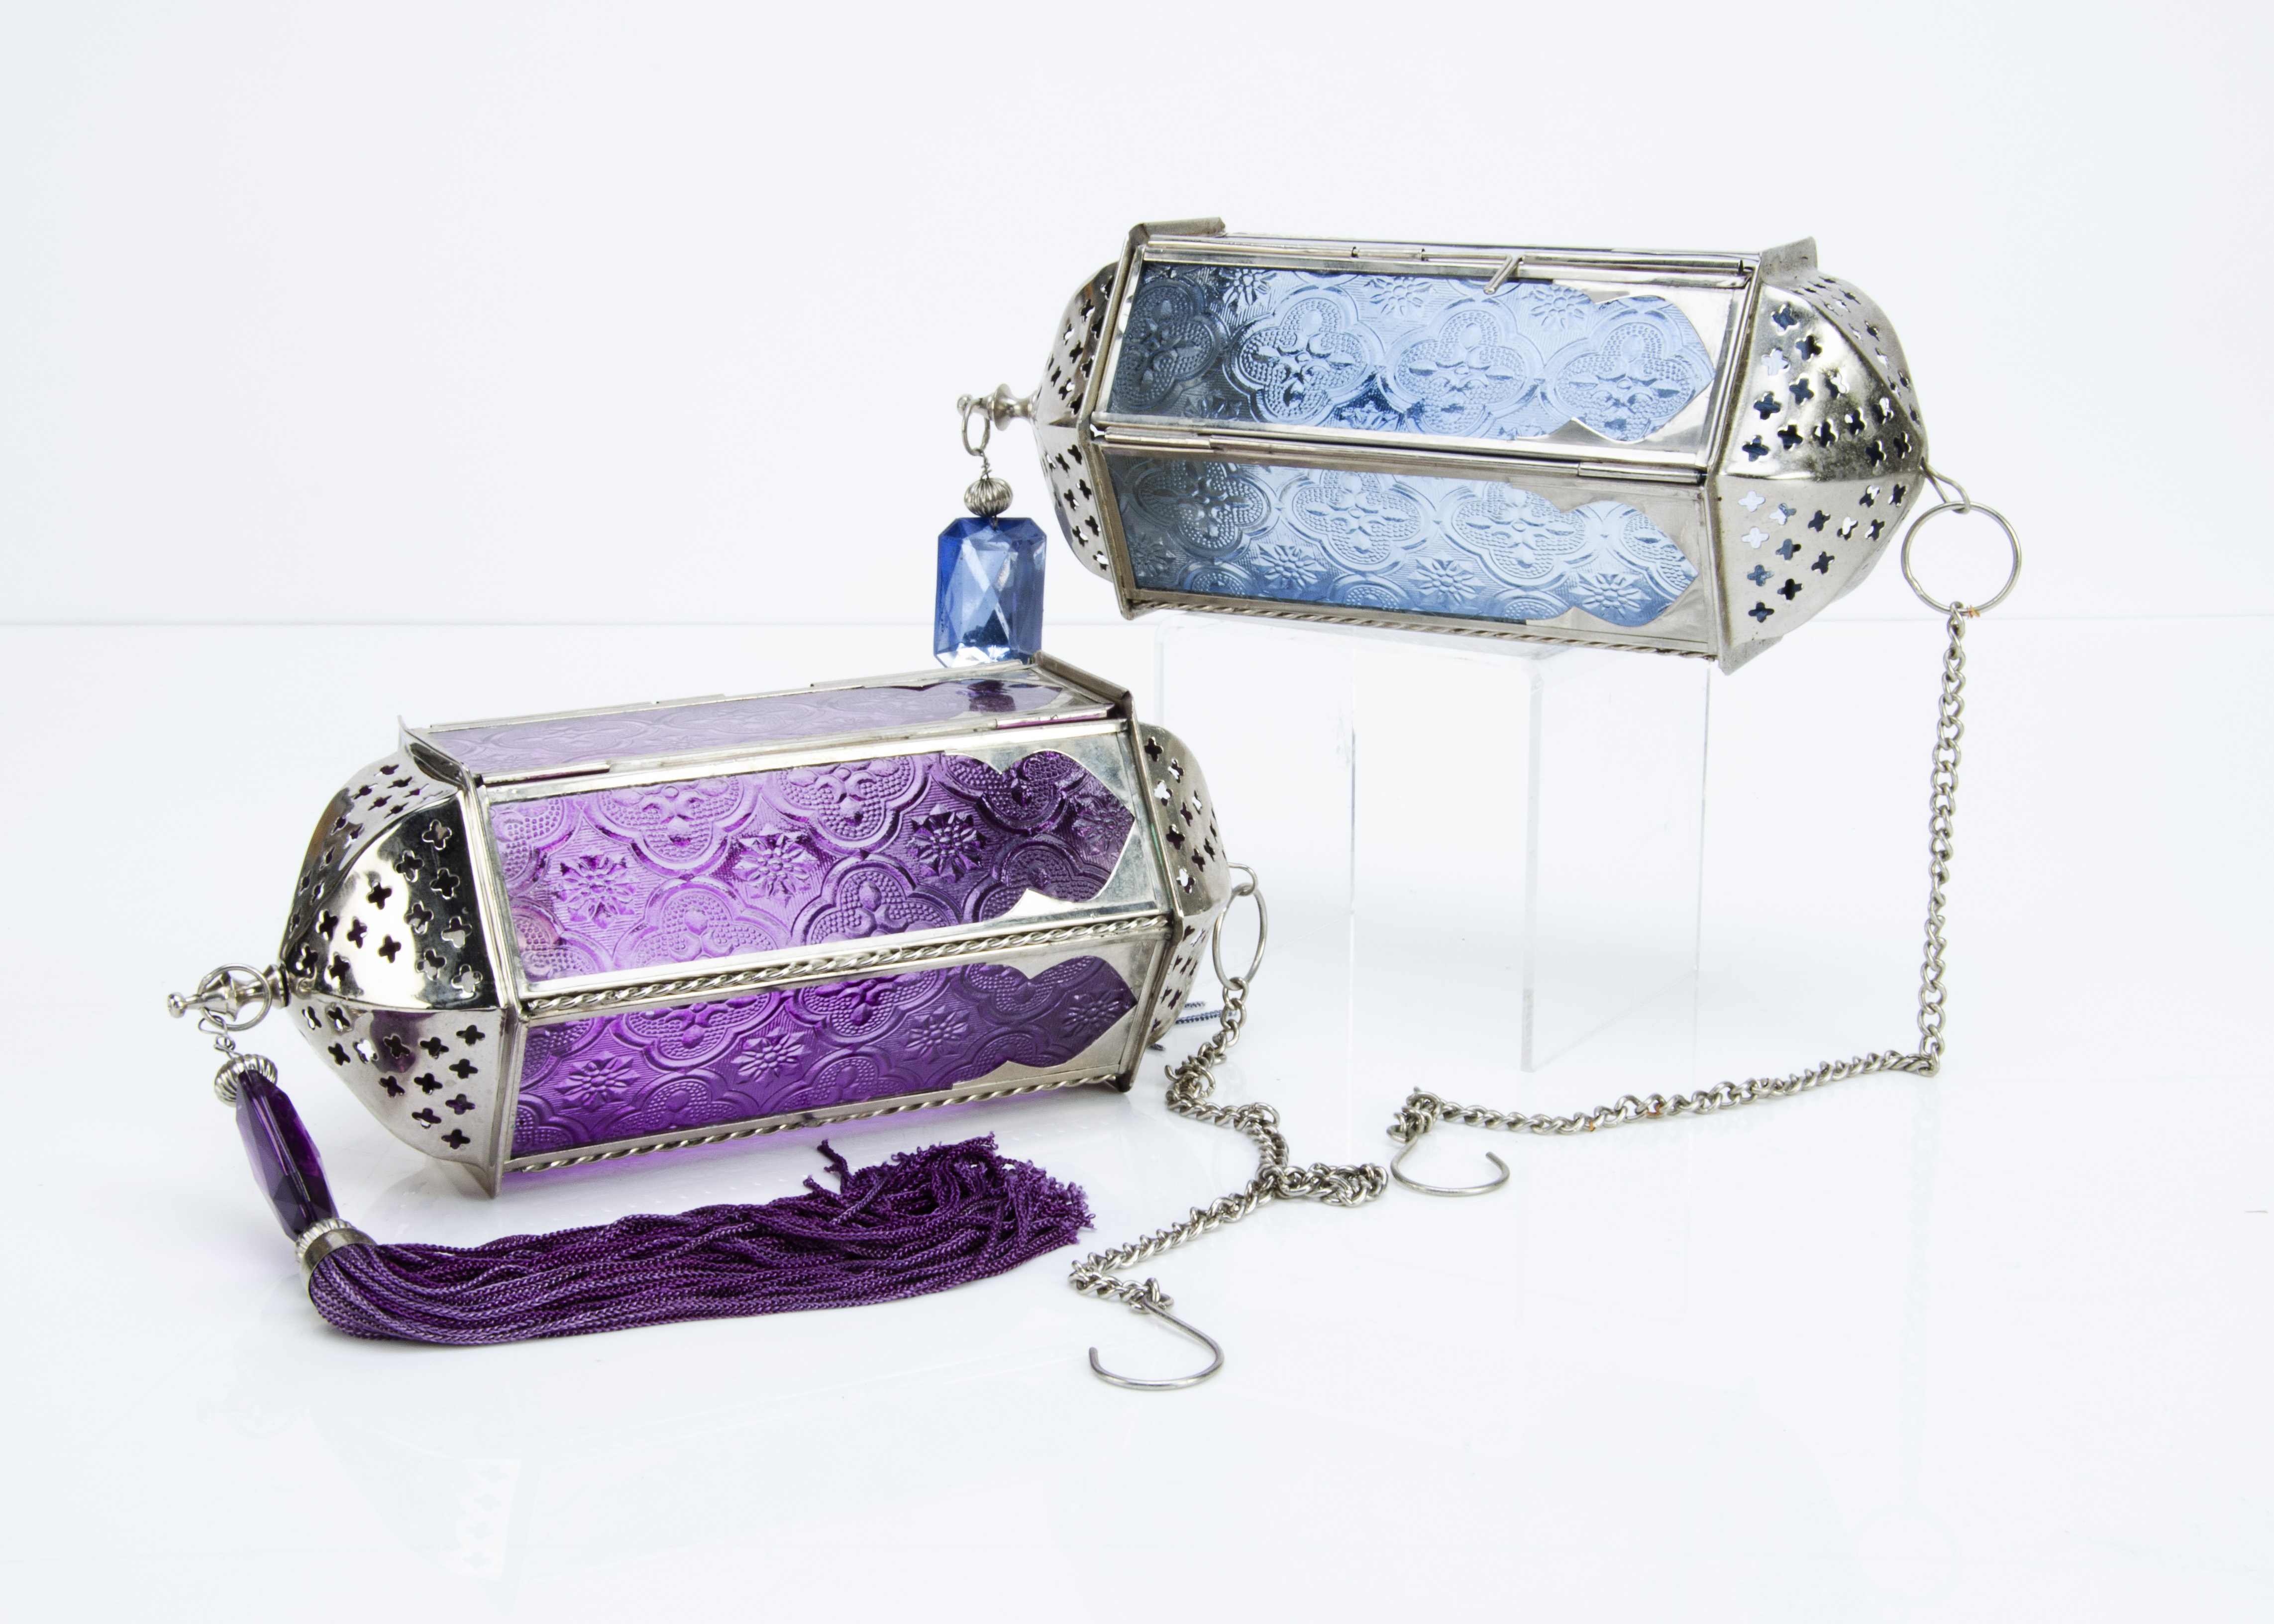 A pair of modern hexagonal chromed metal hanging lanterns, with moulded glass in pink and blue